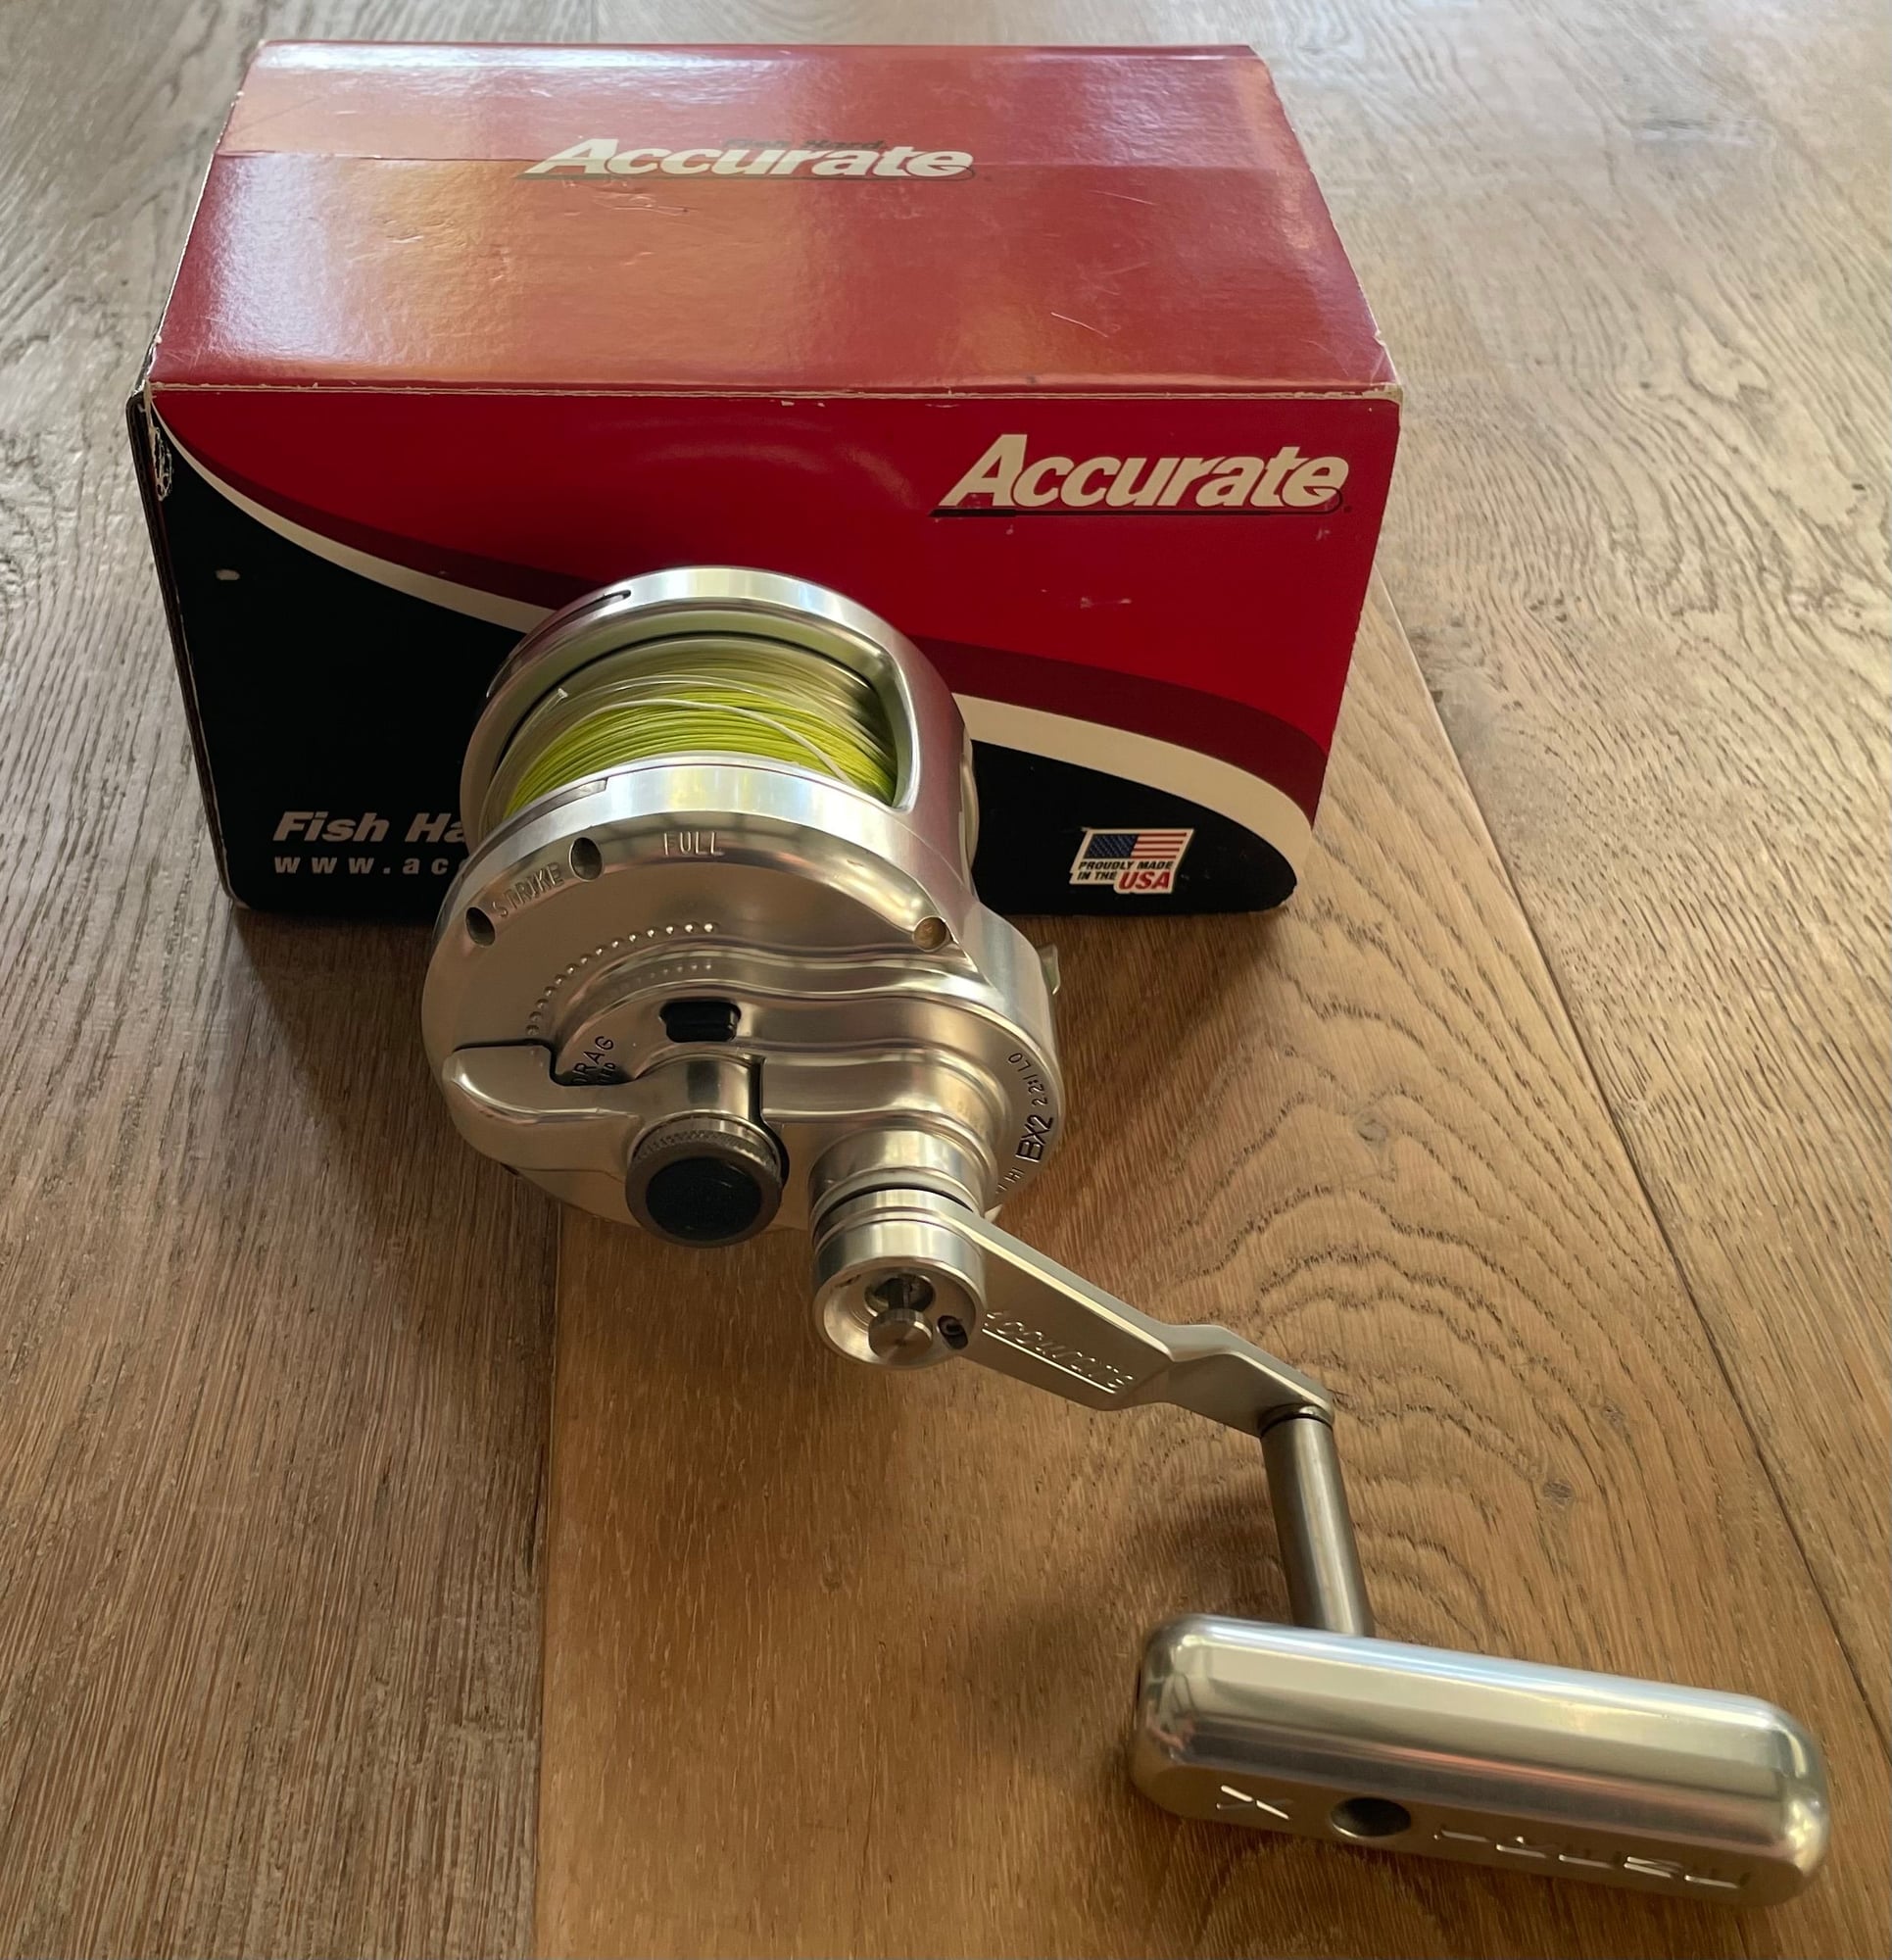 Accurate 2 speed boss extreme 30 narrow fishing reel brand new - The Hull  Truth - Boating and Fishing Forum